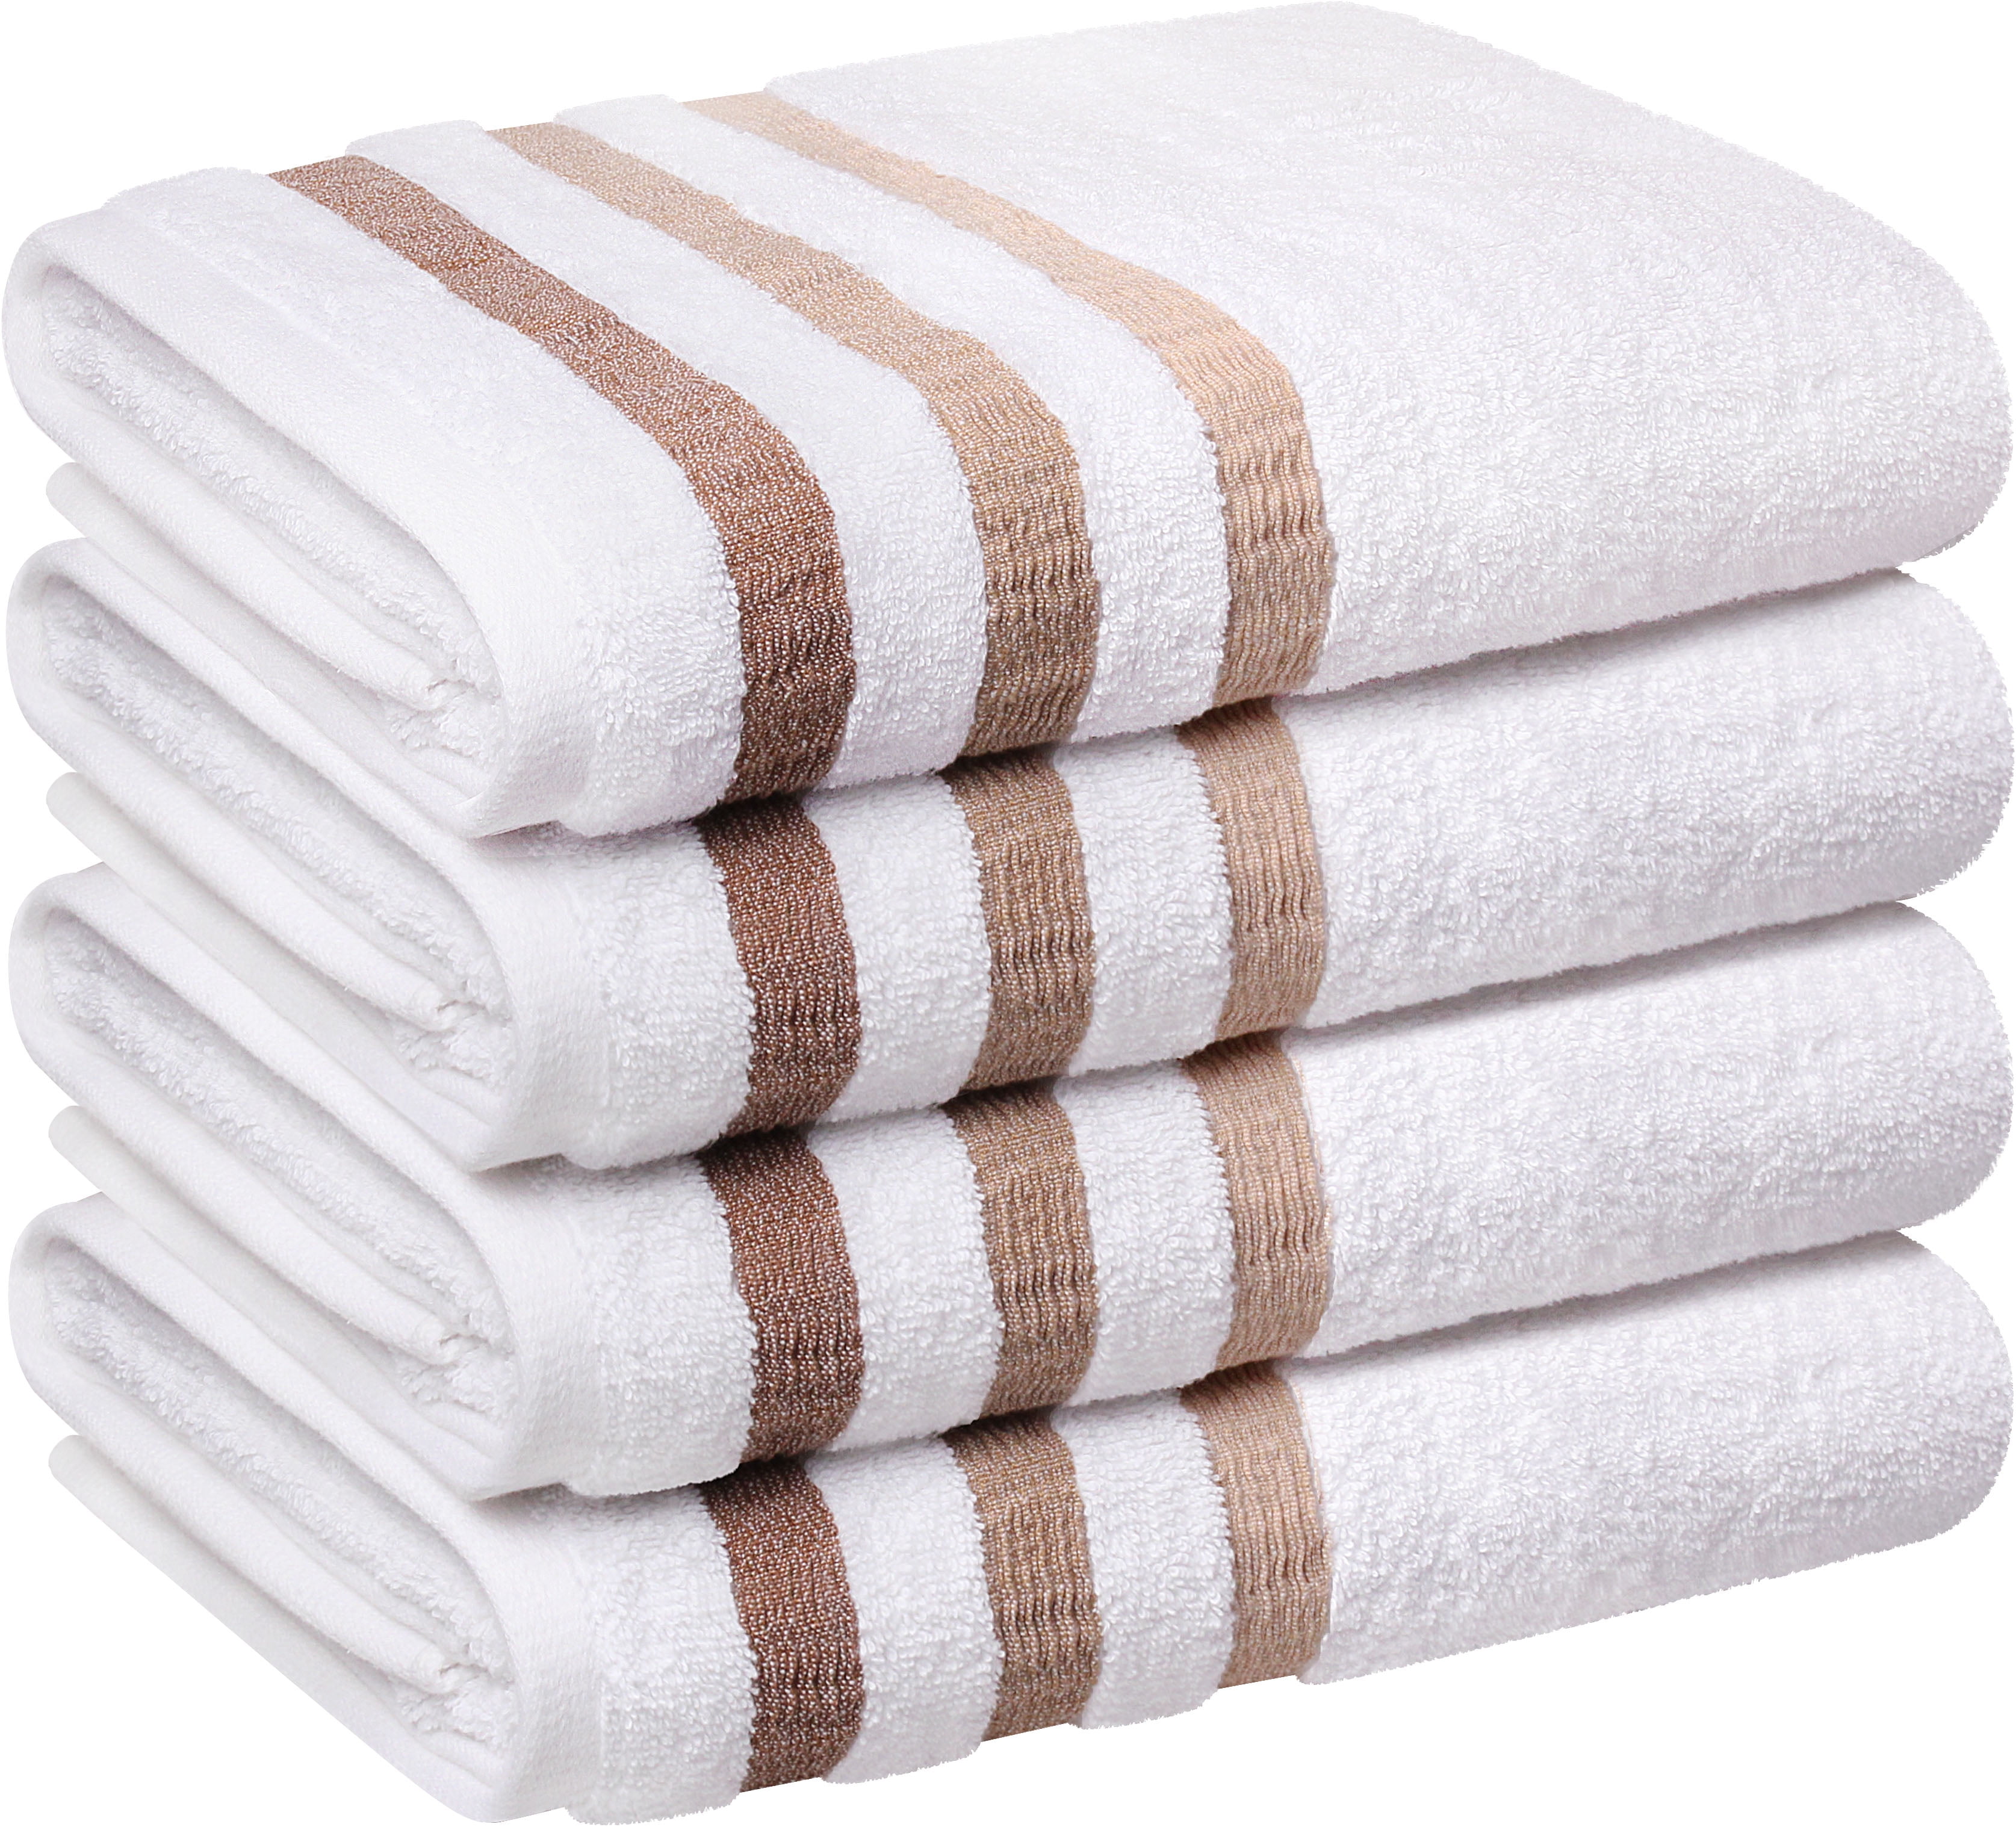 4 Pack 600 GSM Large 100% Cotton Bath Pool Towels Set 27x54 Inches Beach 